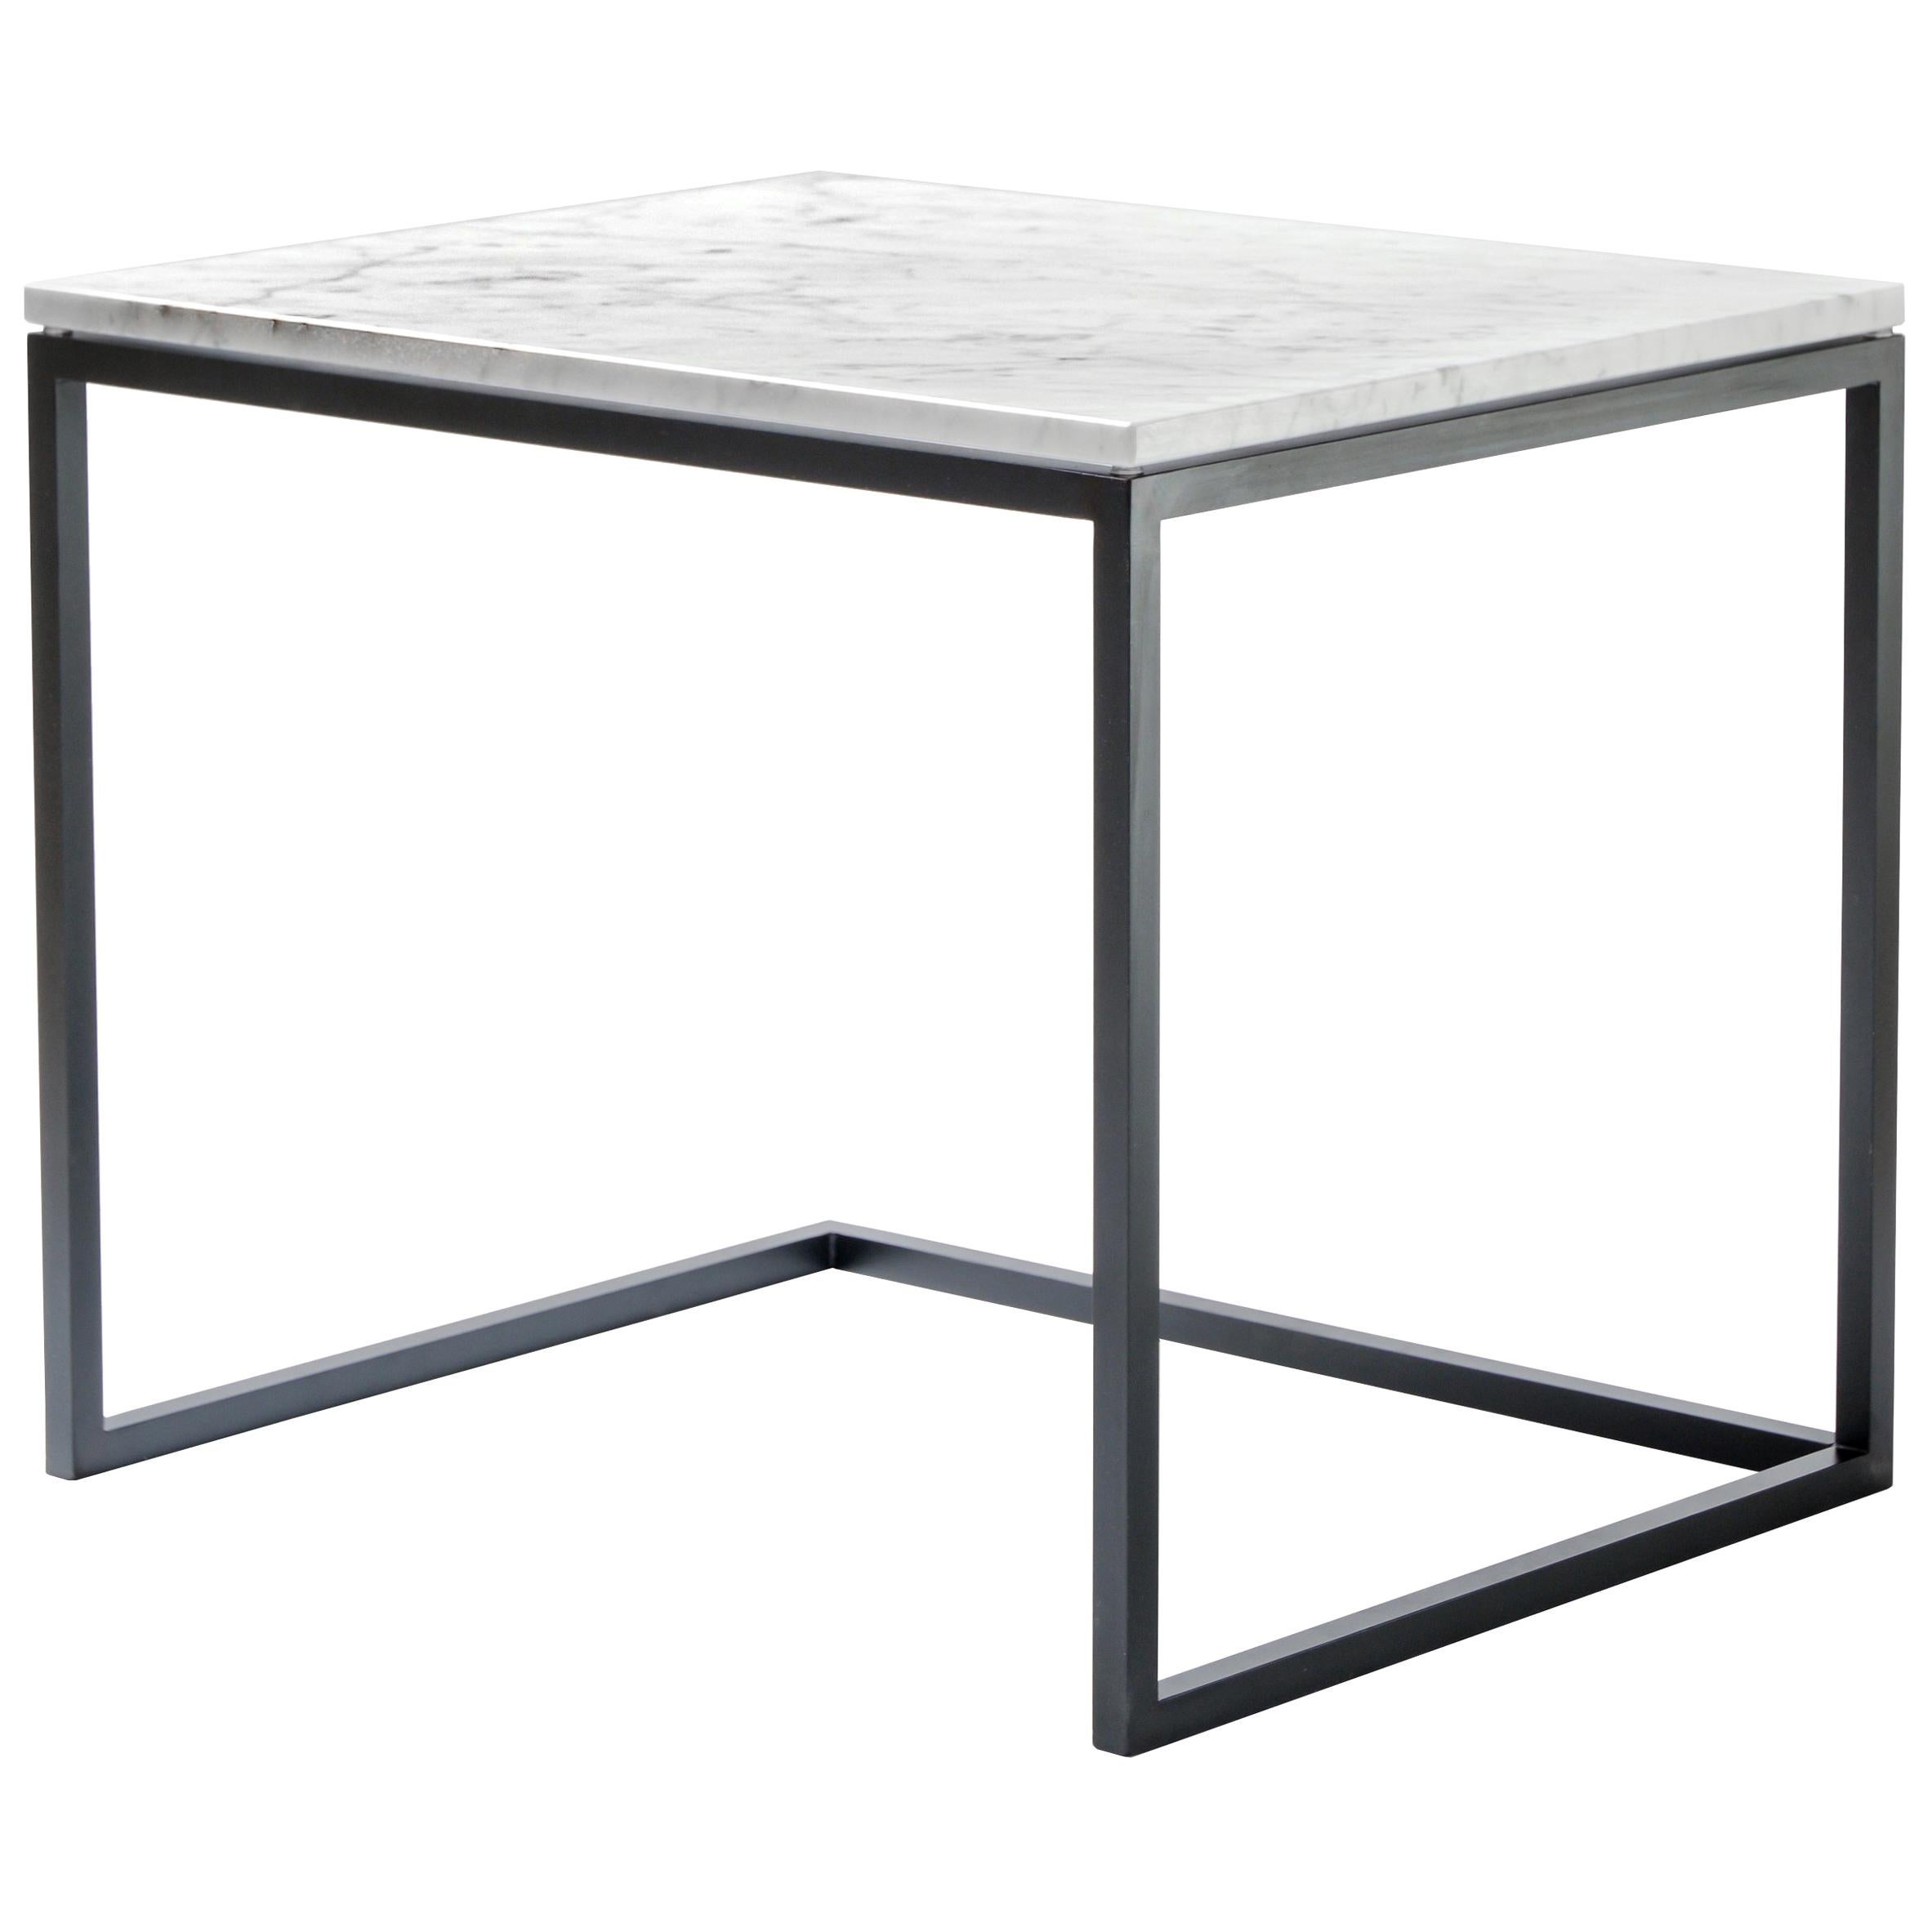 ESOPO Modern Handmade Iron Coffee Table with White Carrara Marble Top For Sale